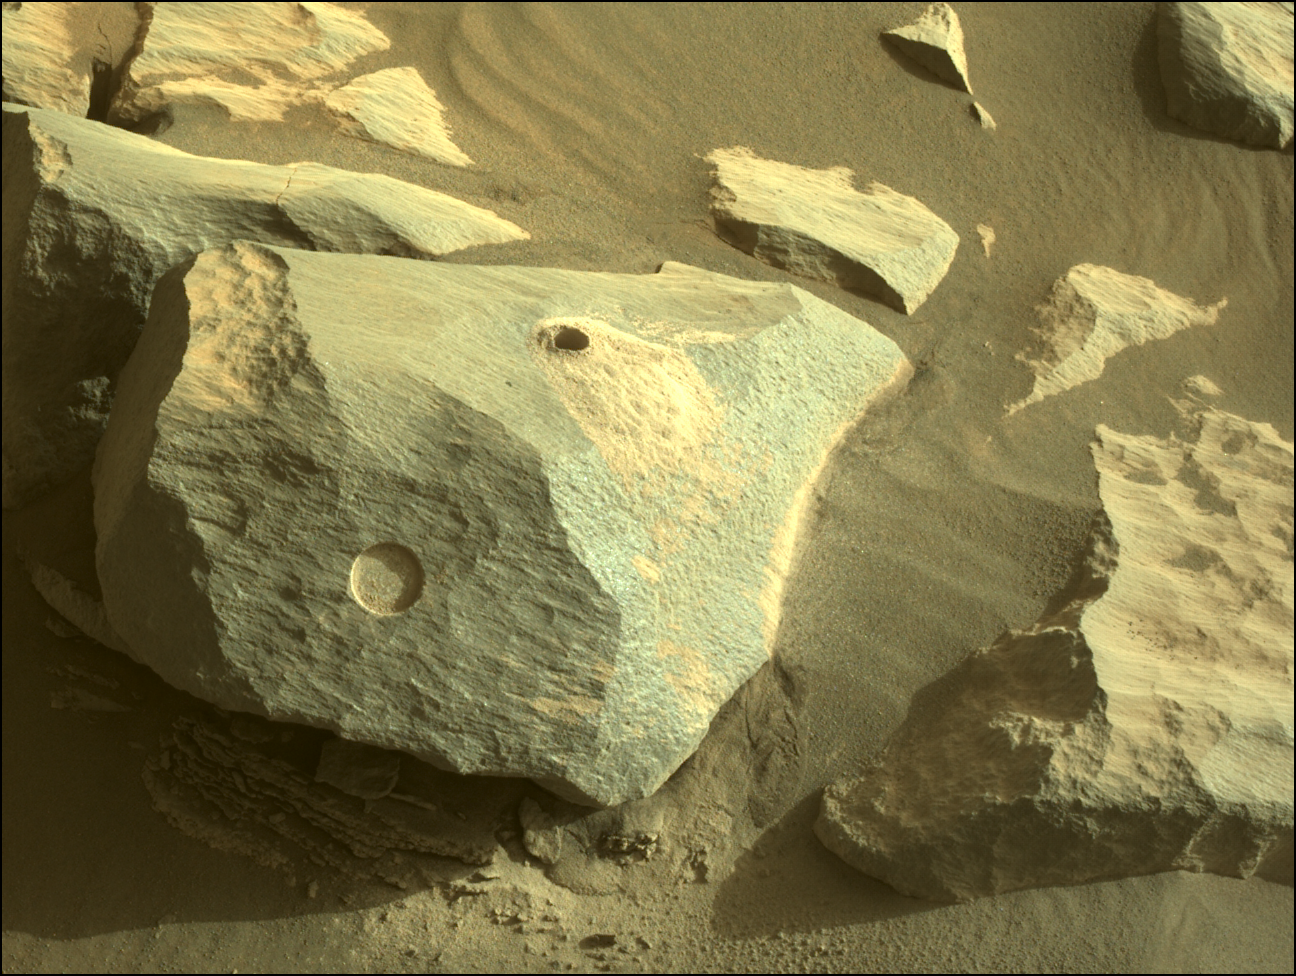 Image taken was taken by the Mars Perseverance rover after collecting the rock sample 8 at Ha'ahóni (aka "Hahonih"). This image shows the rock protruding out of the ground with an abrasion patch and a drill hole.